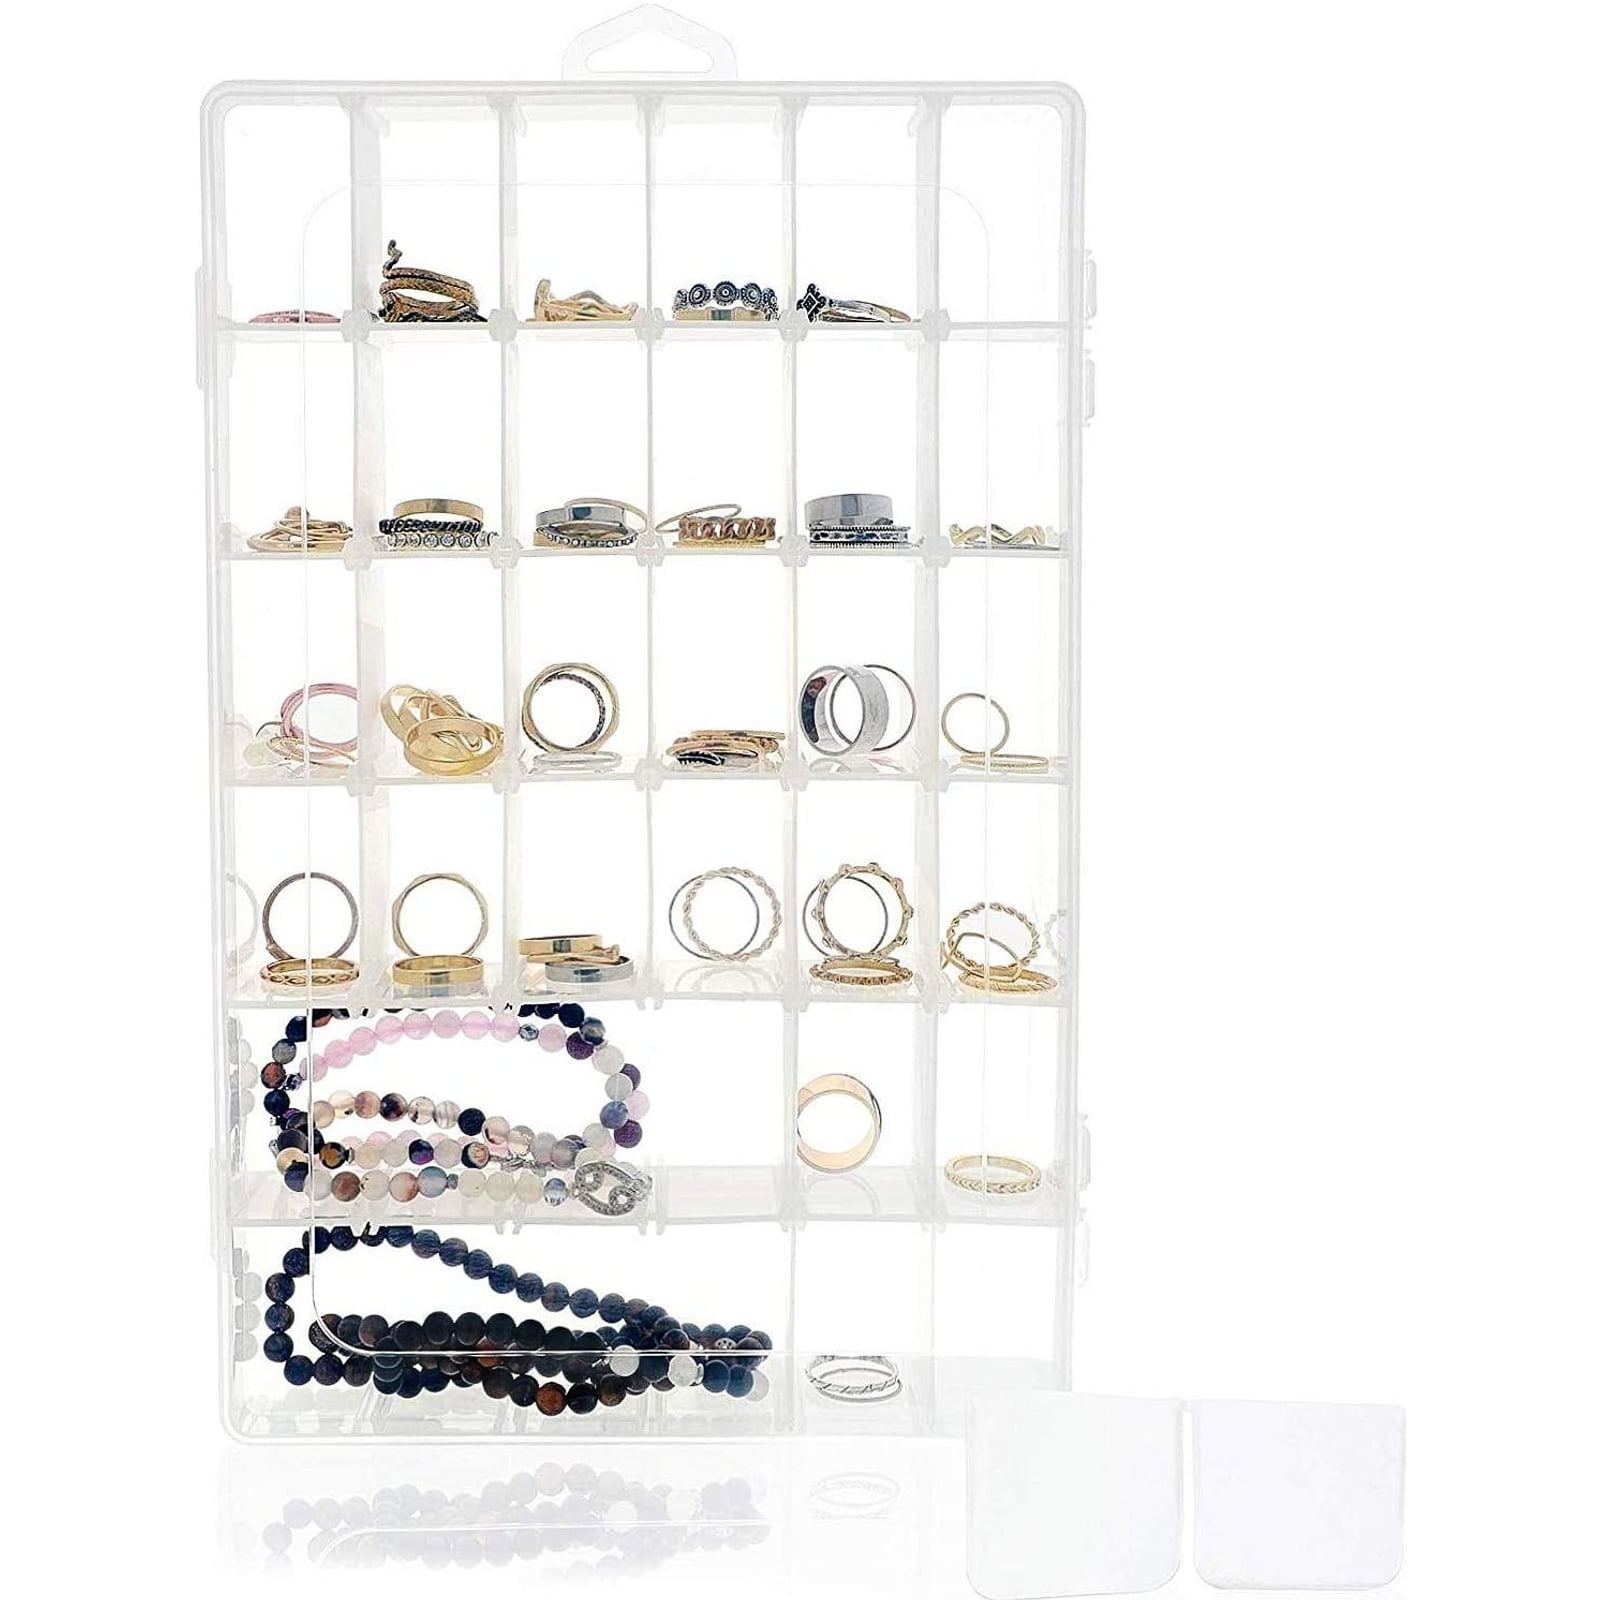 Outus 2 Pack 36 Grids Jewelry Dividers Box Organizer Adjustable Clear Plastic Bead Case Storage Container